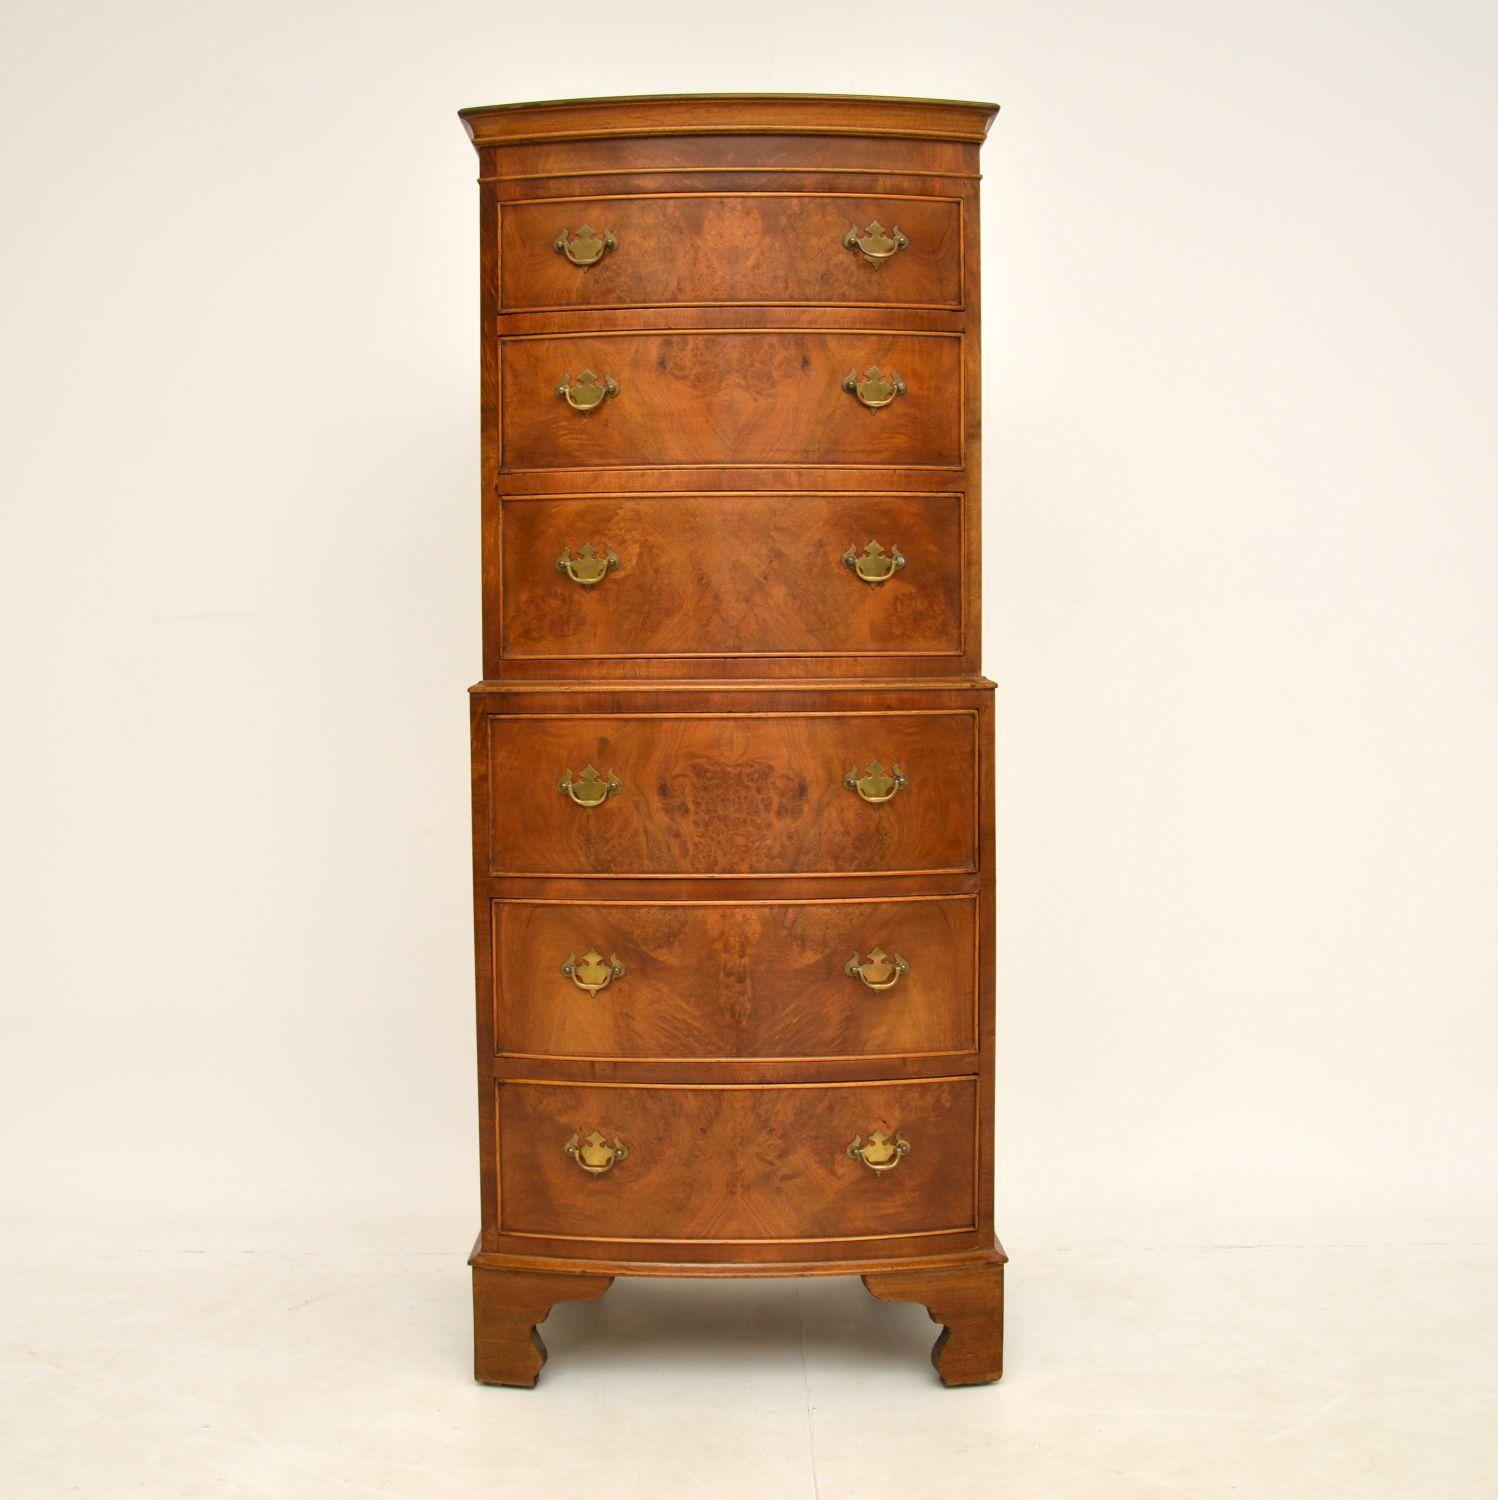 A beautiful and top quality walnut chest on chest. This is in the antique Georgian style, it dates from around the 1930’s.

It is extremely well made and this is a really useful size. It is tall and slim, with lots of storage space. The colour and